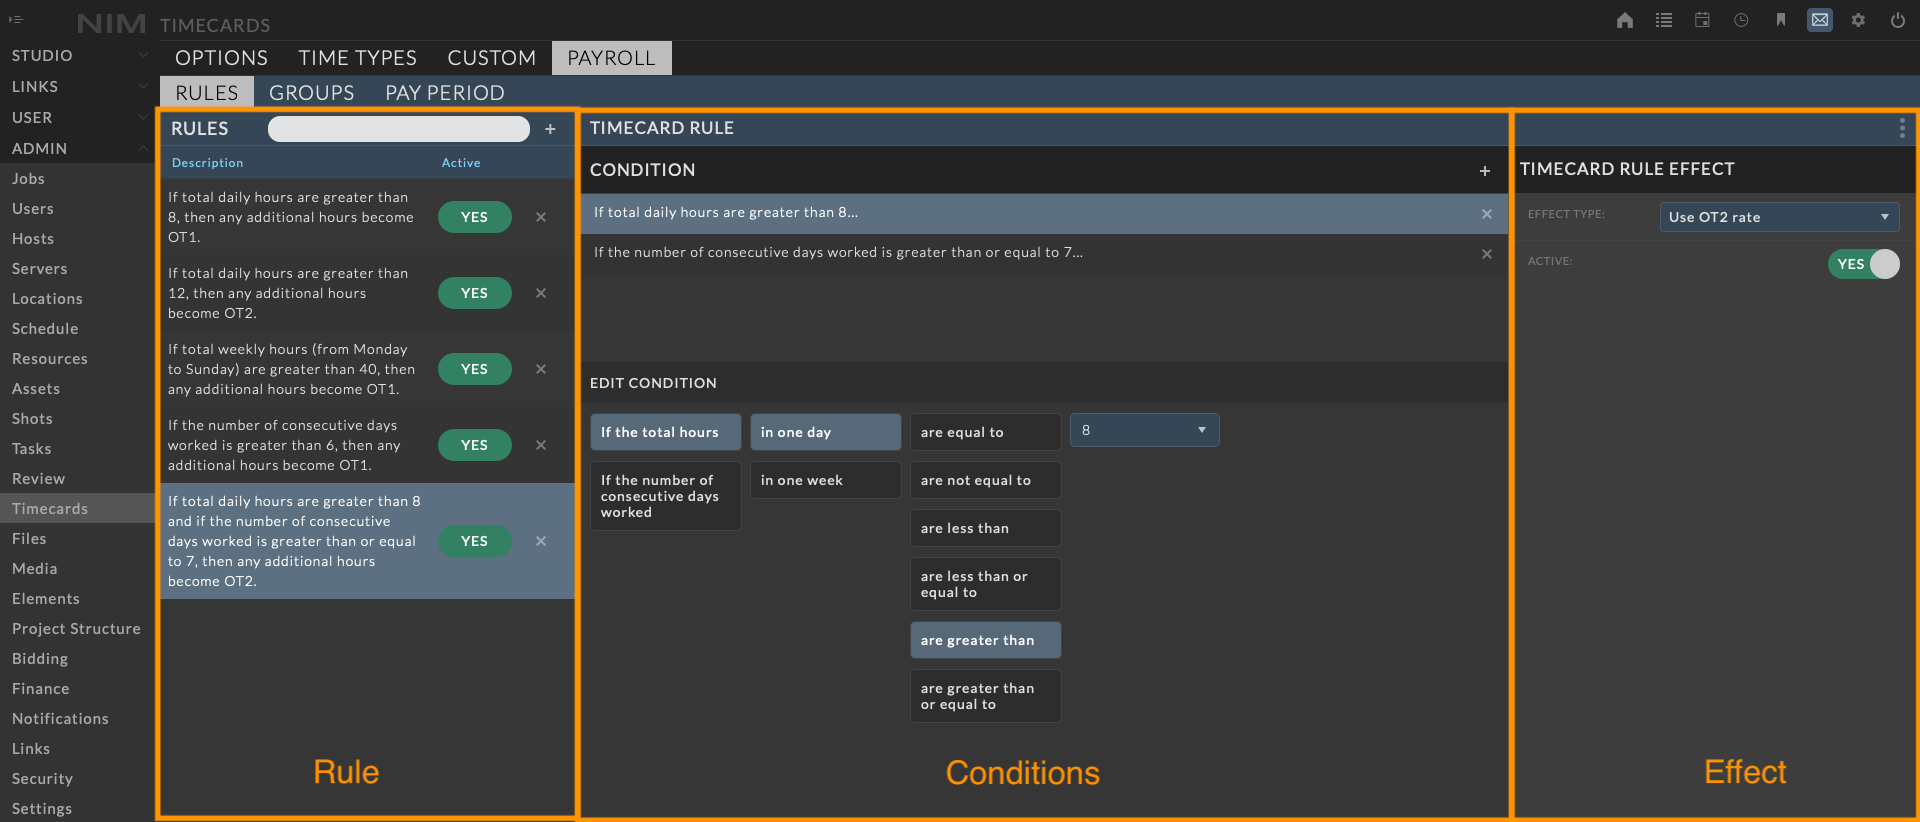 _images/nim5_admin_timecards_payroll_rules_conditions_ui.png